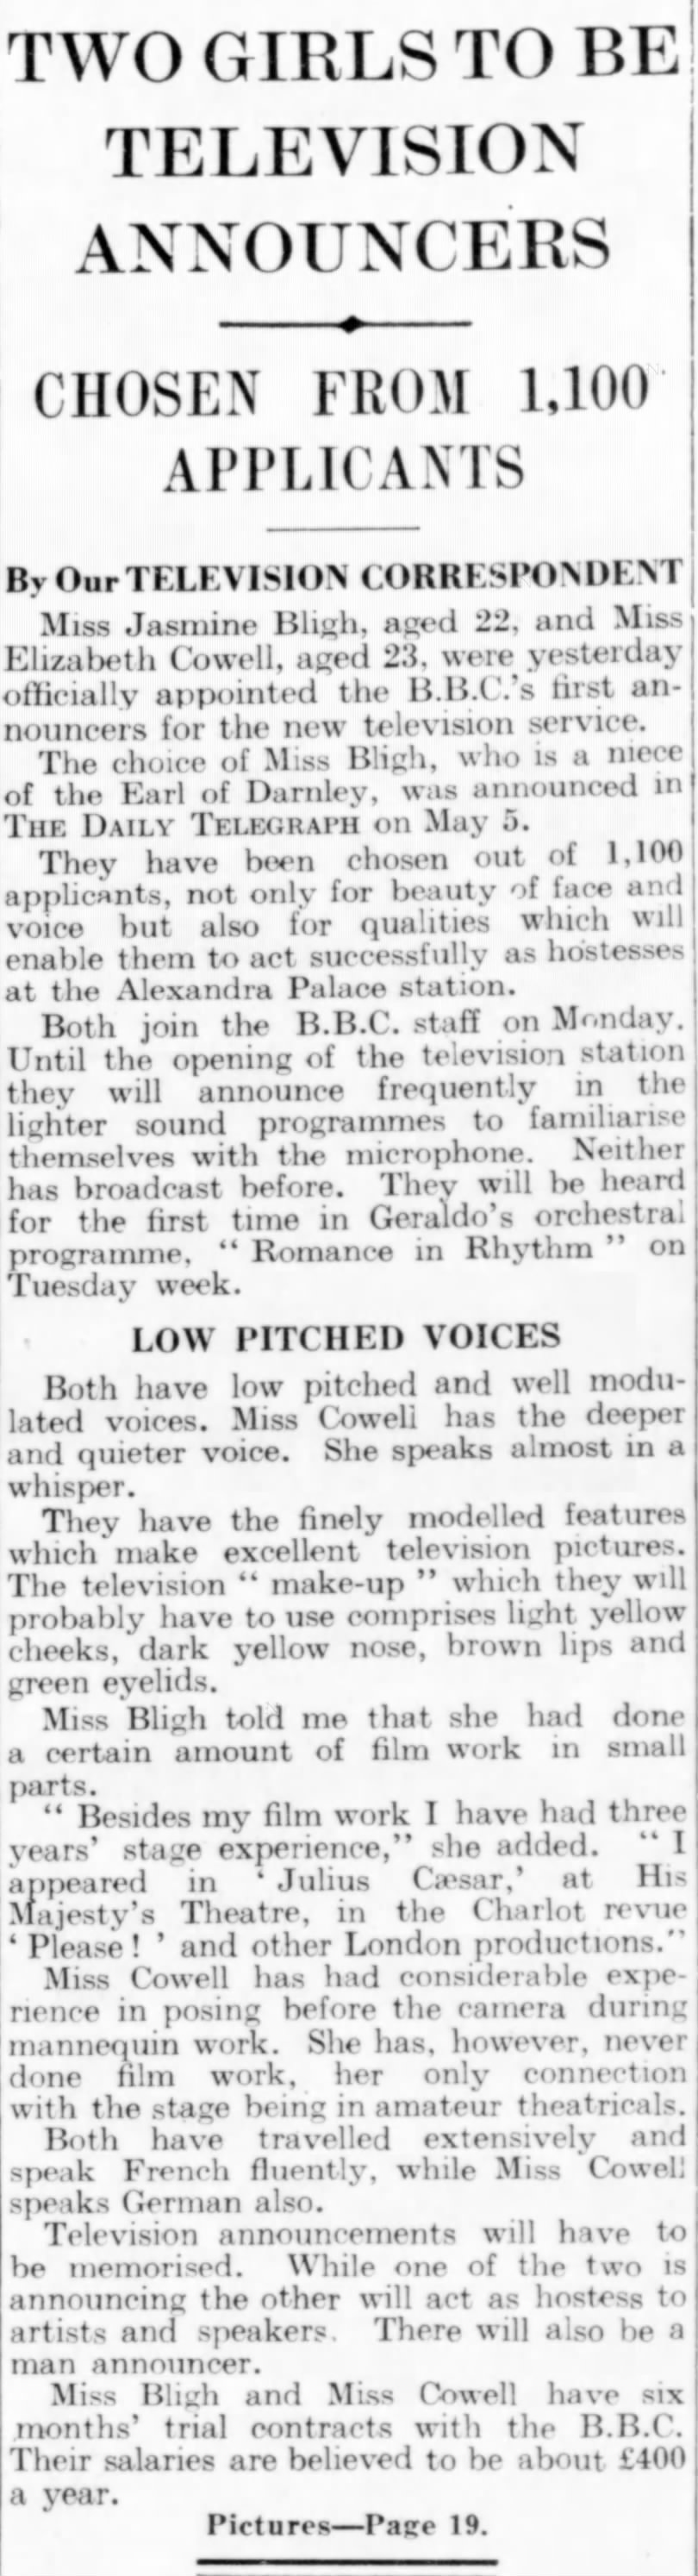 Television Announcers Girls - The Daily Telegraph - Page 12 - 14 May 1936